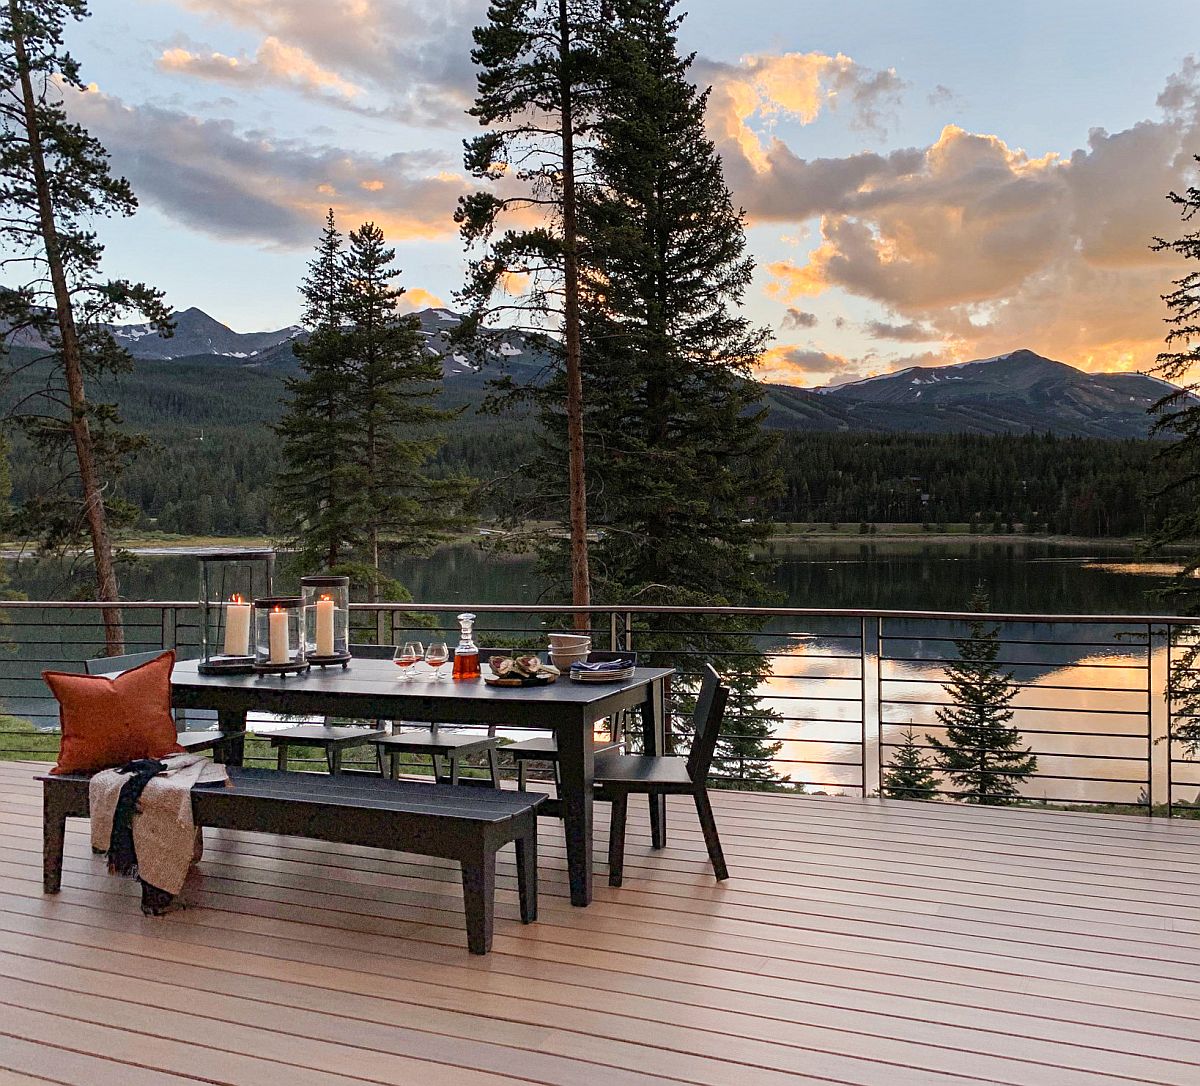 It-is-the-view-that-steals-the-show-on-this-lakseside-deck-59651